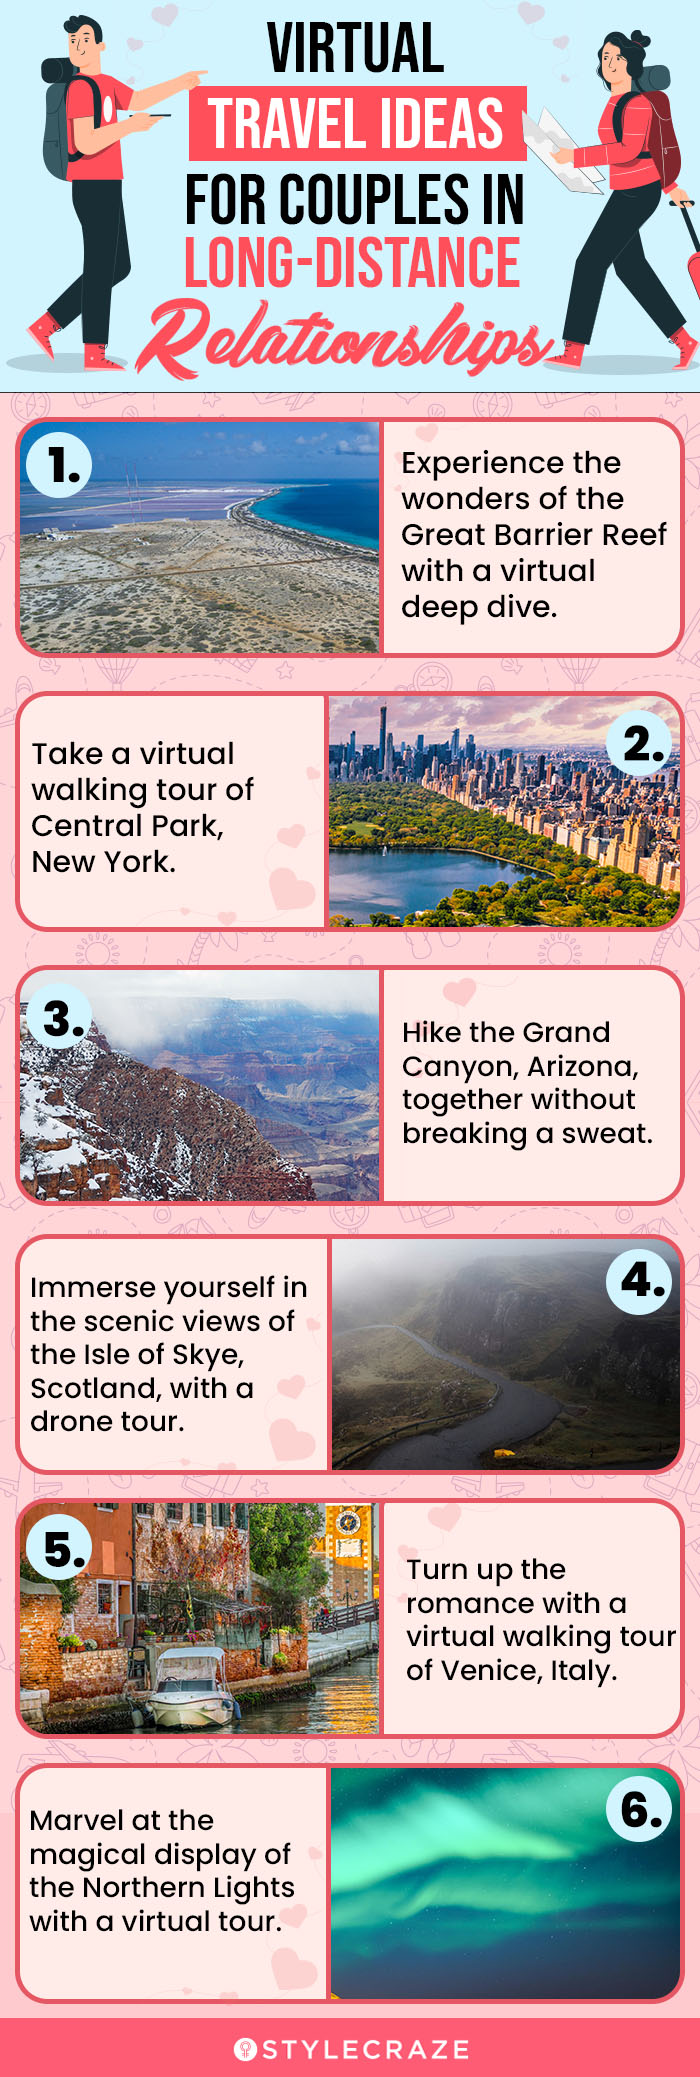 virtual travel ideas for couples in long distance relationships (infographic)